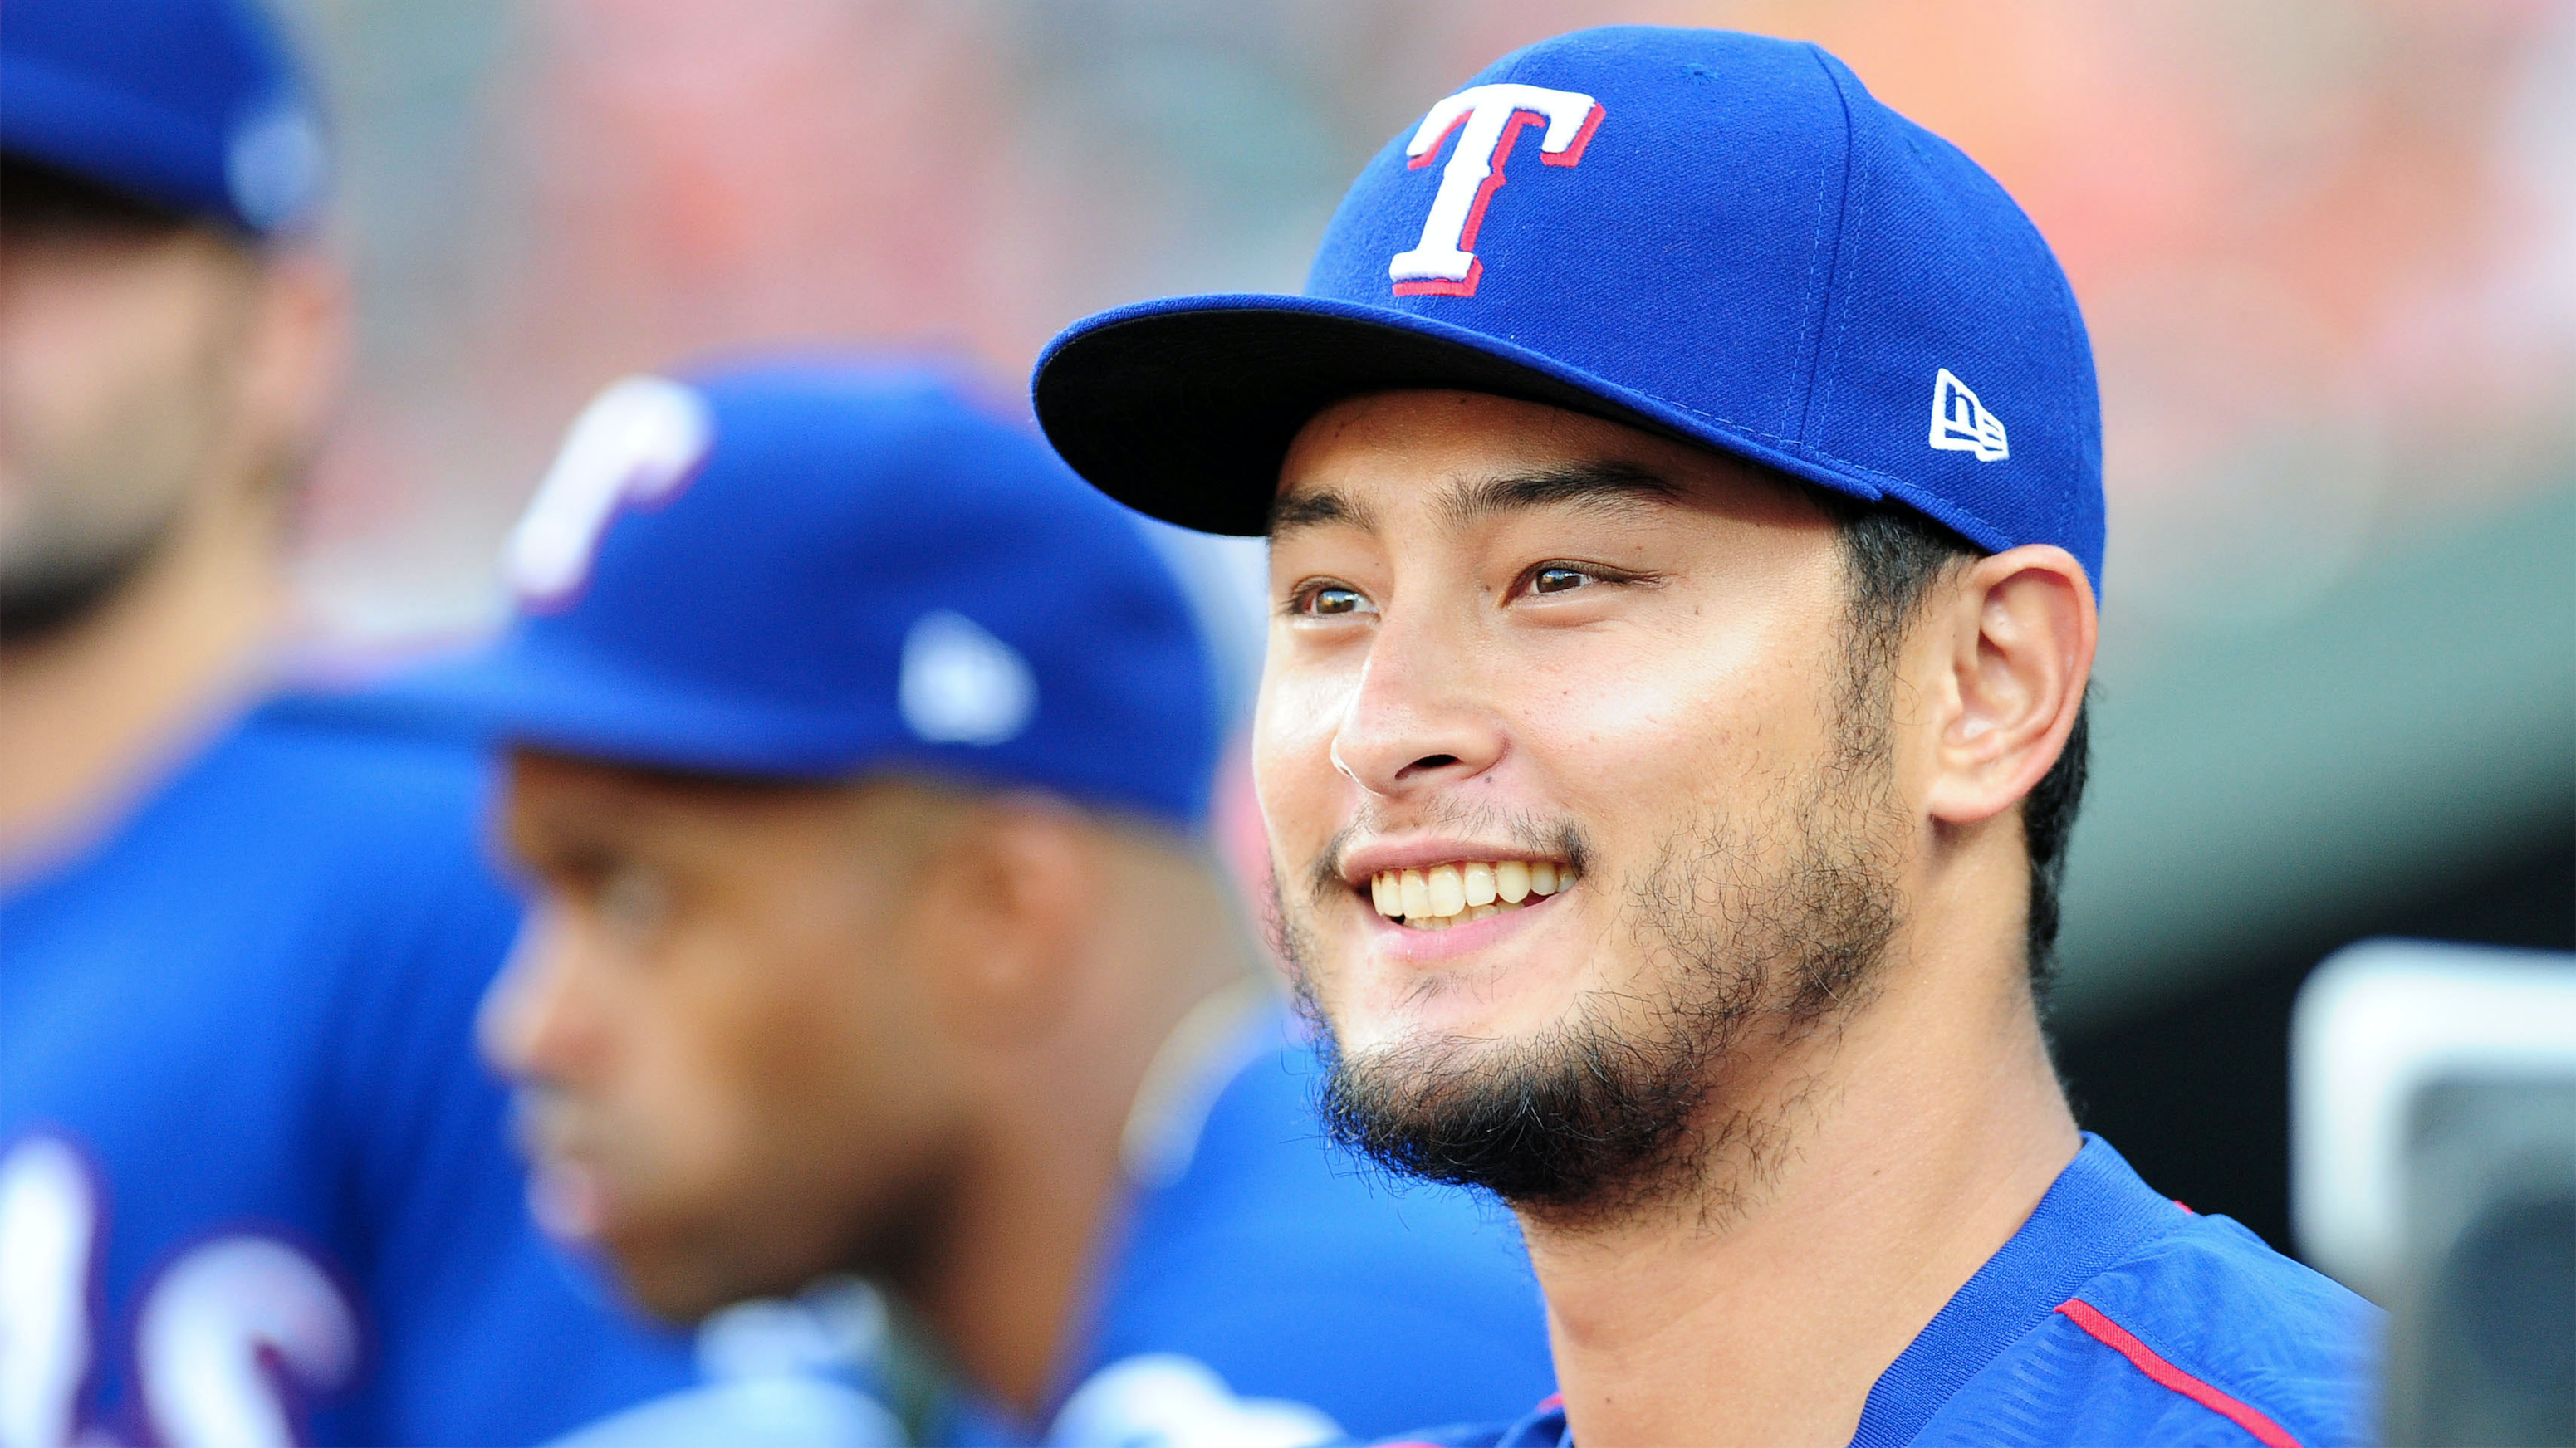 Yu Darvish tweets 'if I sign with the Rangers' during holiday banter